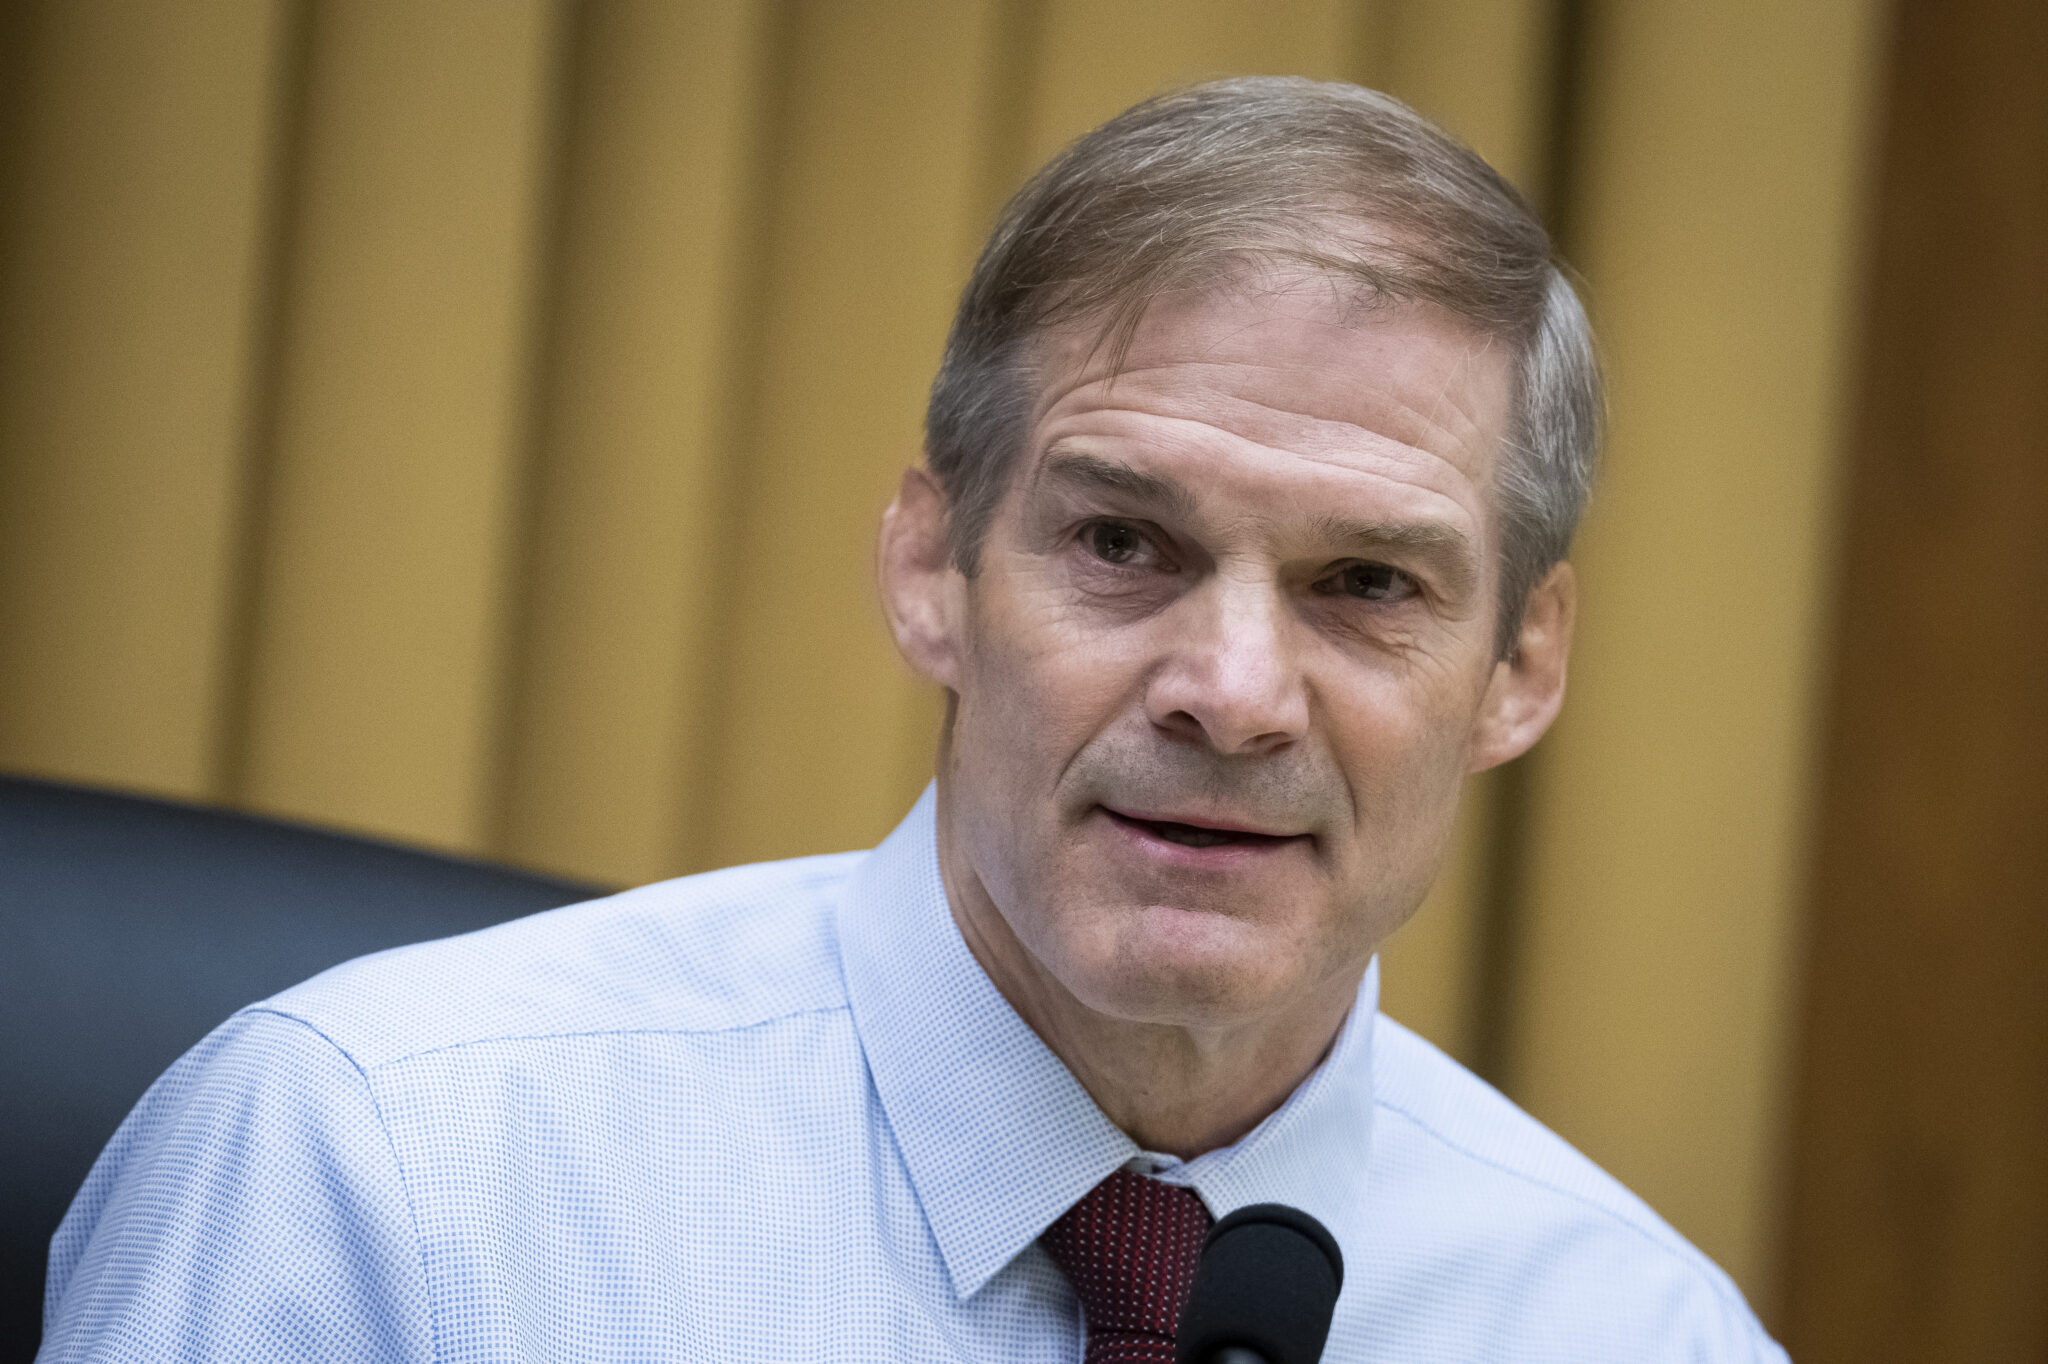 Jim Jordan Spends Thanksgiving Trying to Own the Libs on Social Media with Racist ‘Cowboys and Redskins’ Post (mediaite.com)